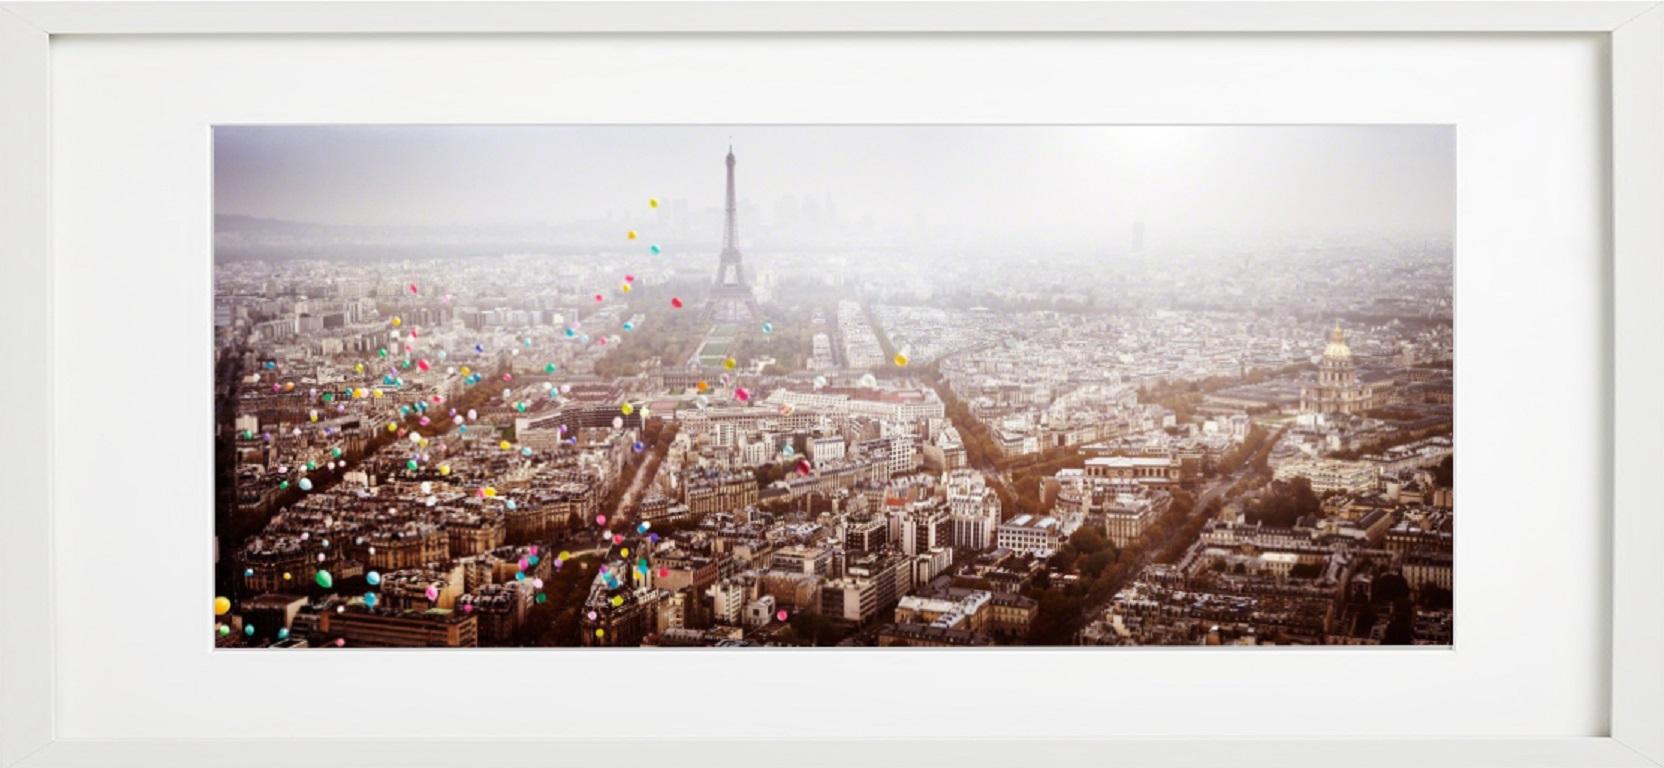 Balloons over Paris (France) - aerial view of Paris with Eiffel Tower balloons  - Contemporary Photograph by David Drebin